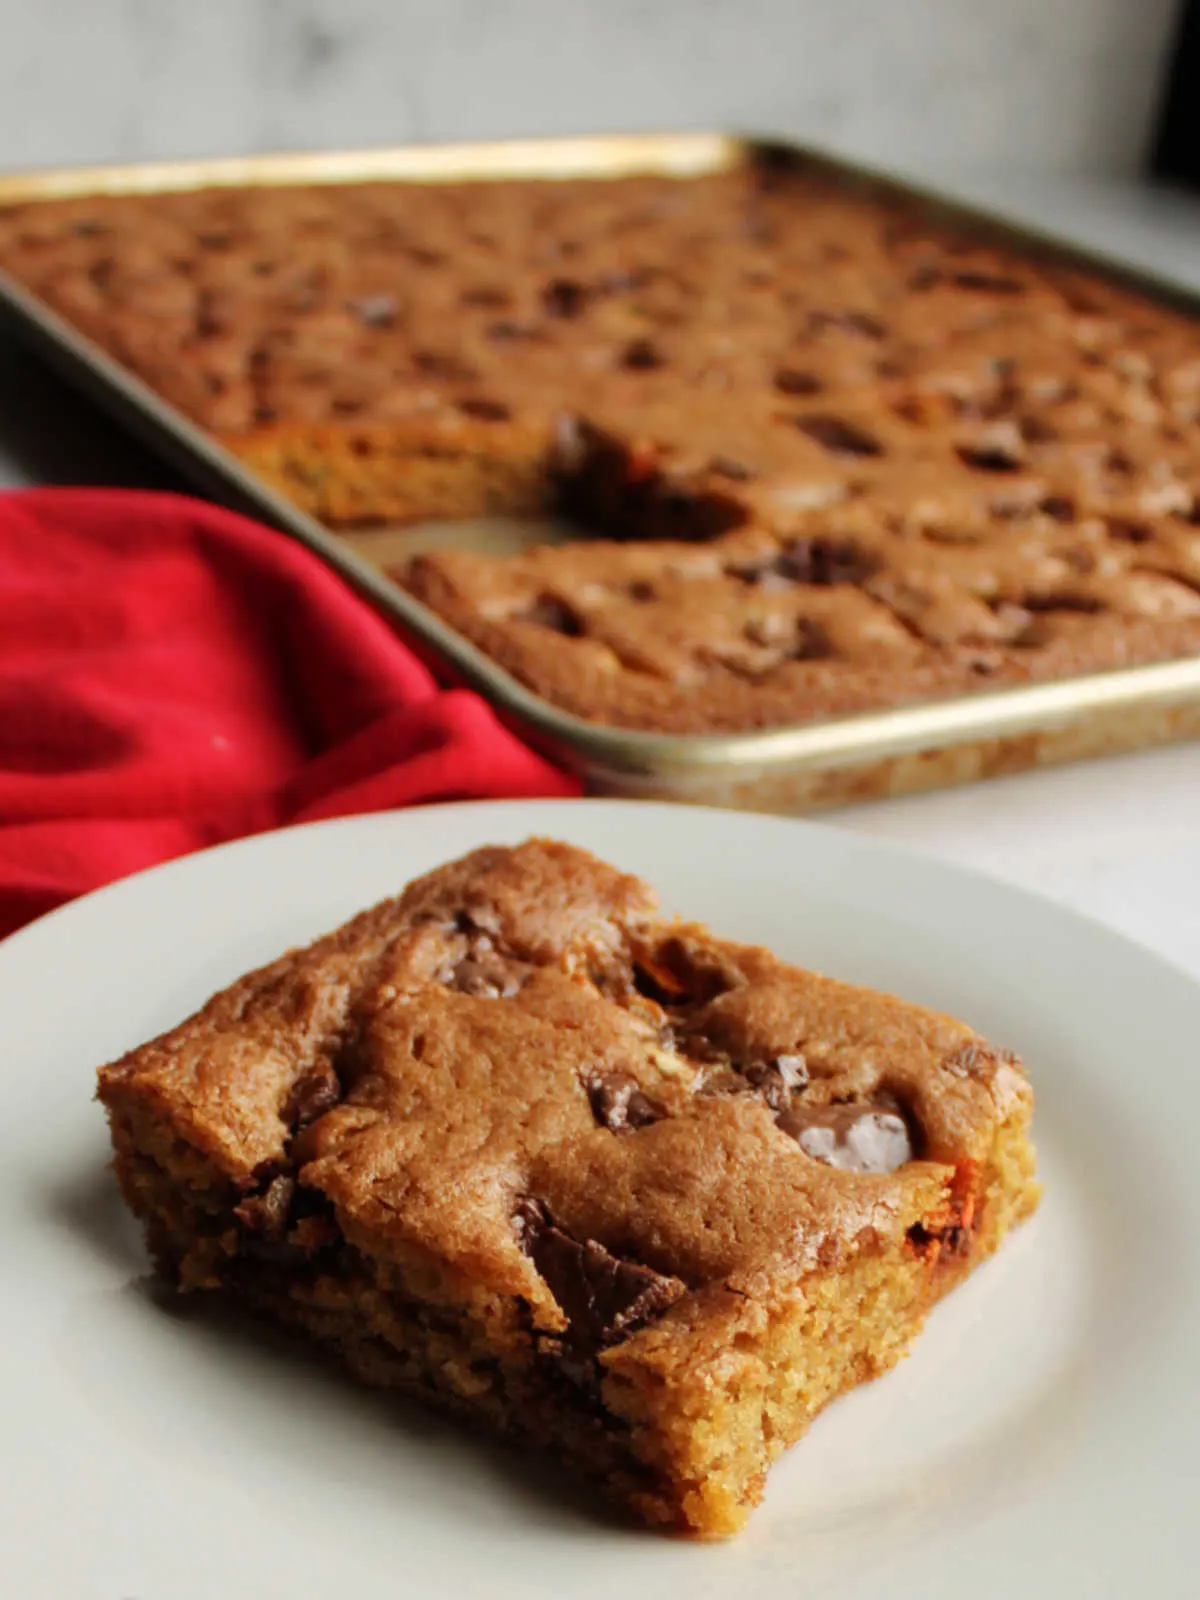 Close up of soft brown sugar blondie showing chewy texture with pieces of candy on top.